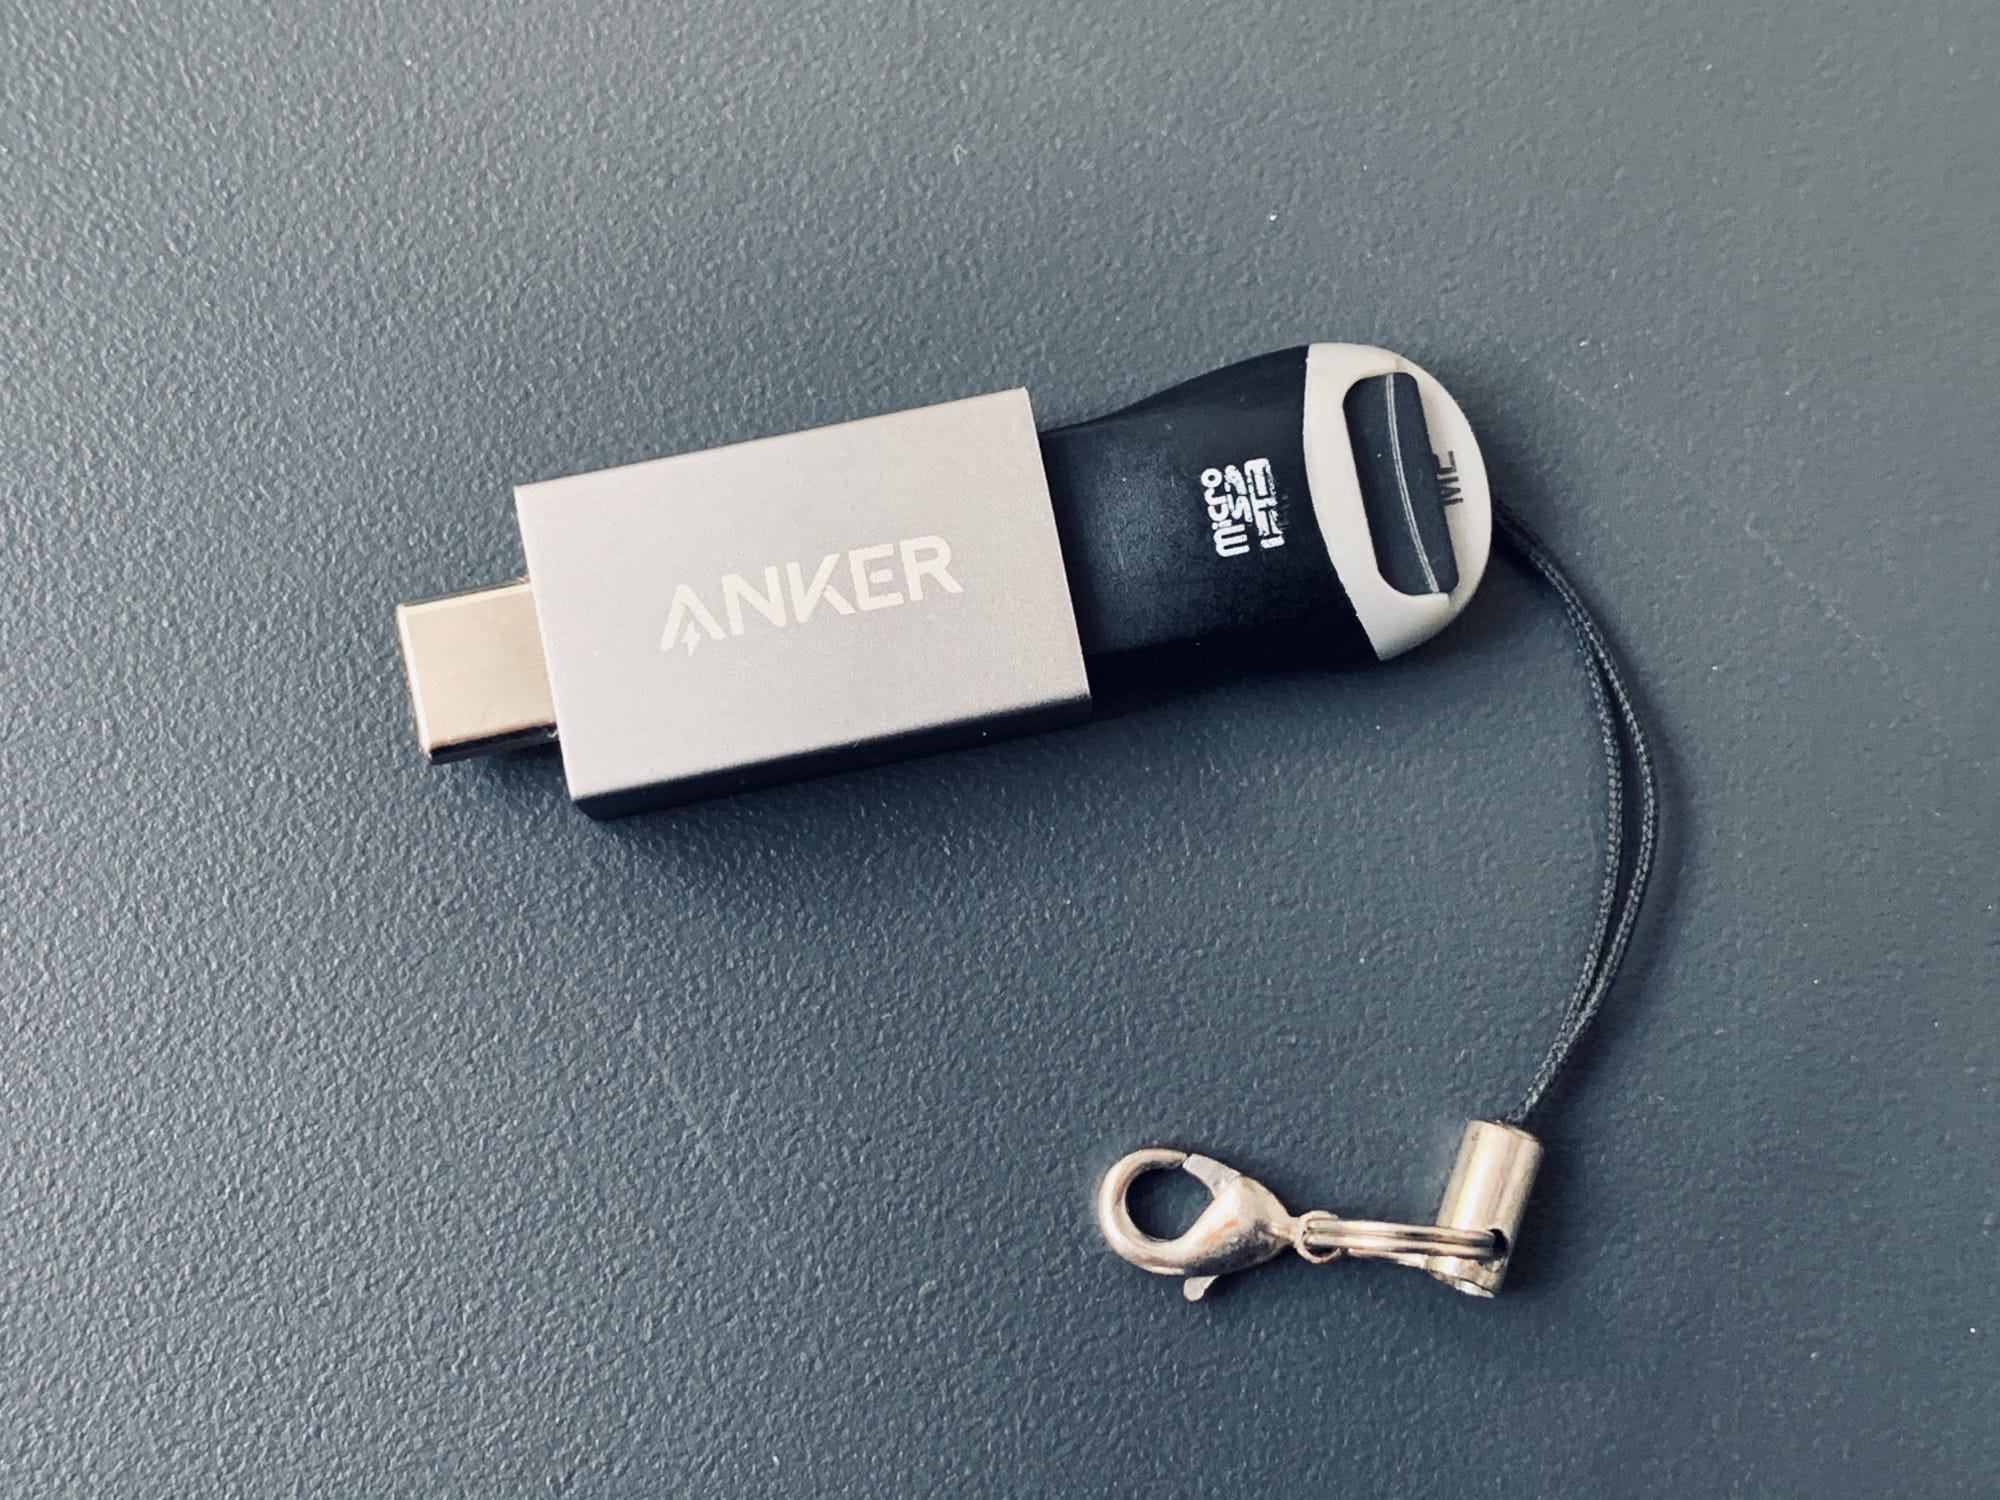 Hang Anker's USB-C to USB-A Female Adapter on a keychain. 